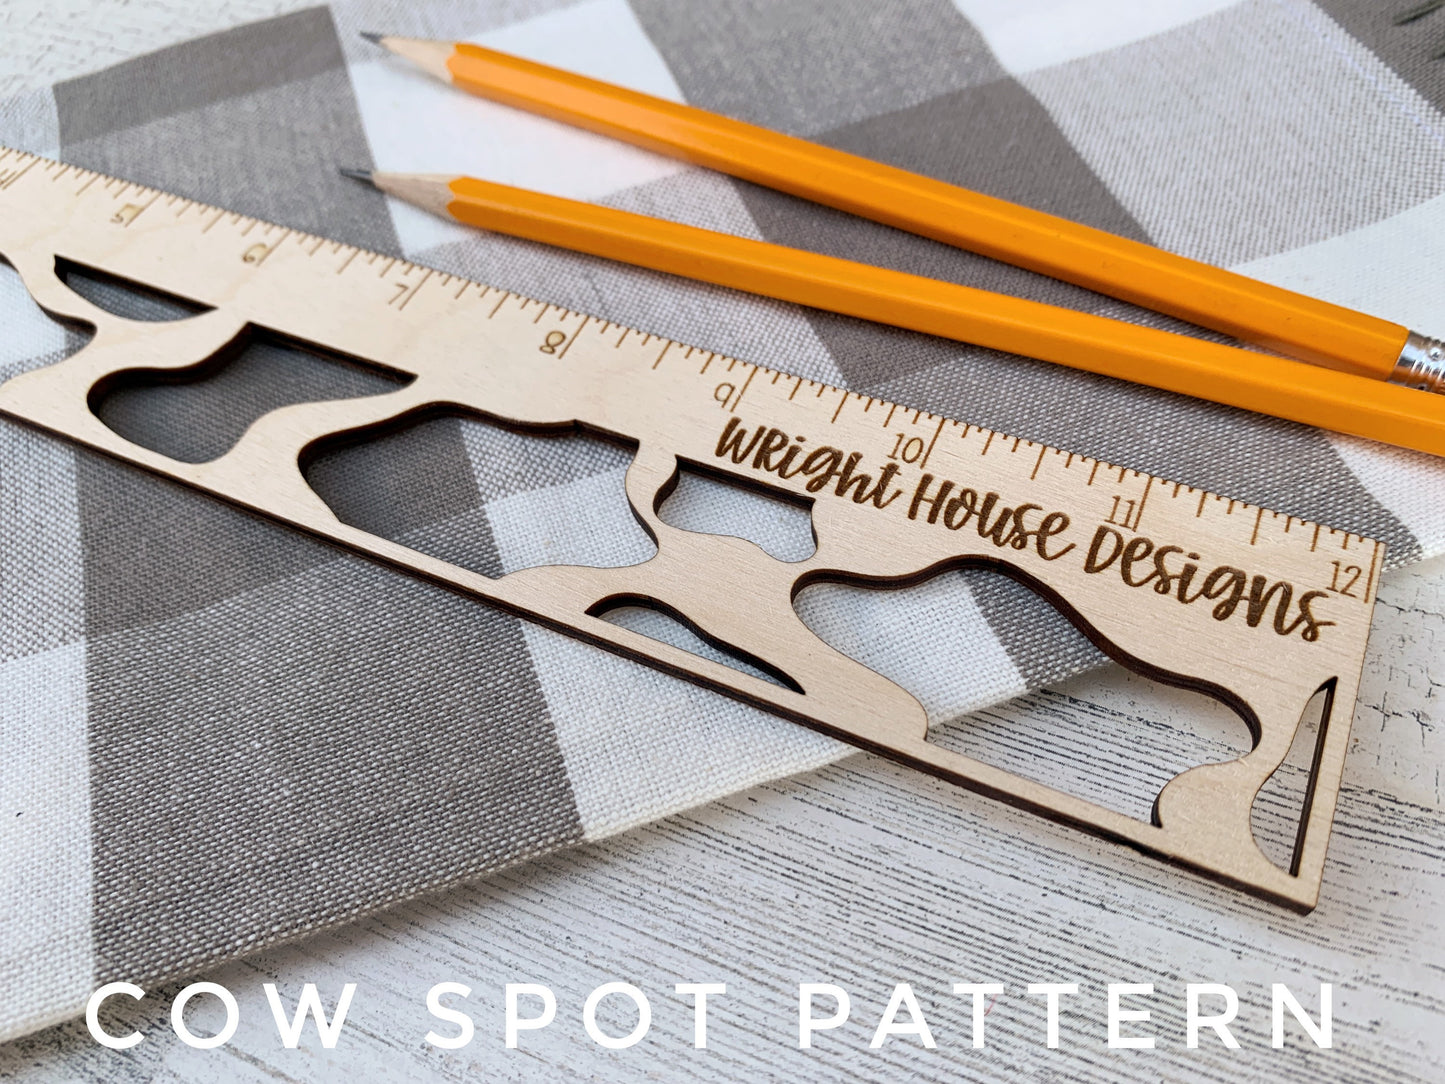 Pretty Pattern Ruler Set For Laser Cutting - Files for Crafters Makers and Product Making - Digital SVG Cut Files For Glowforge Lasers